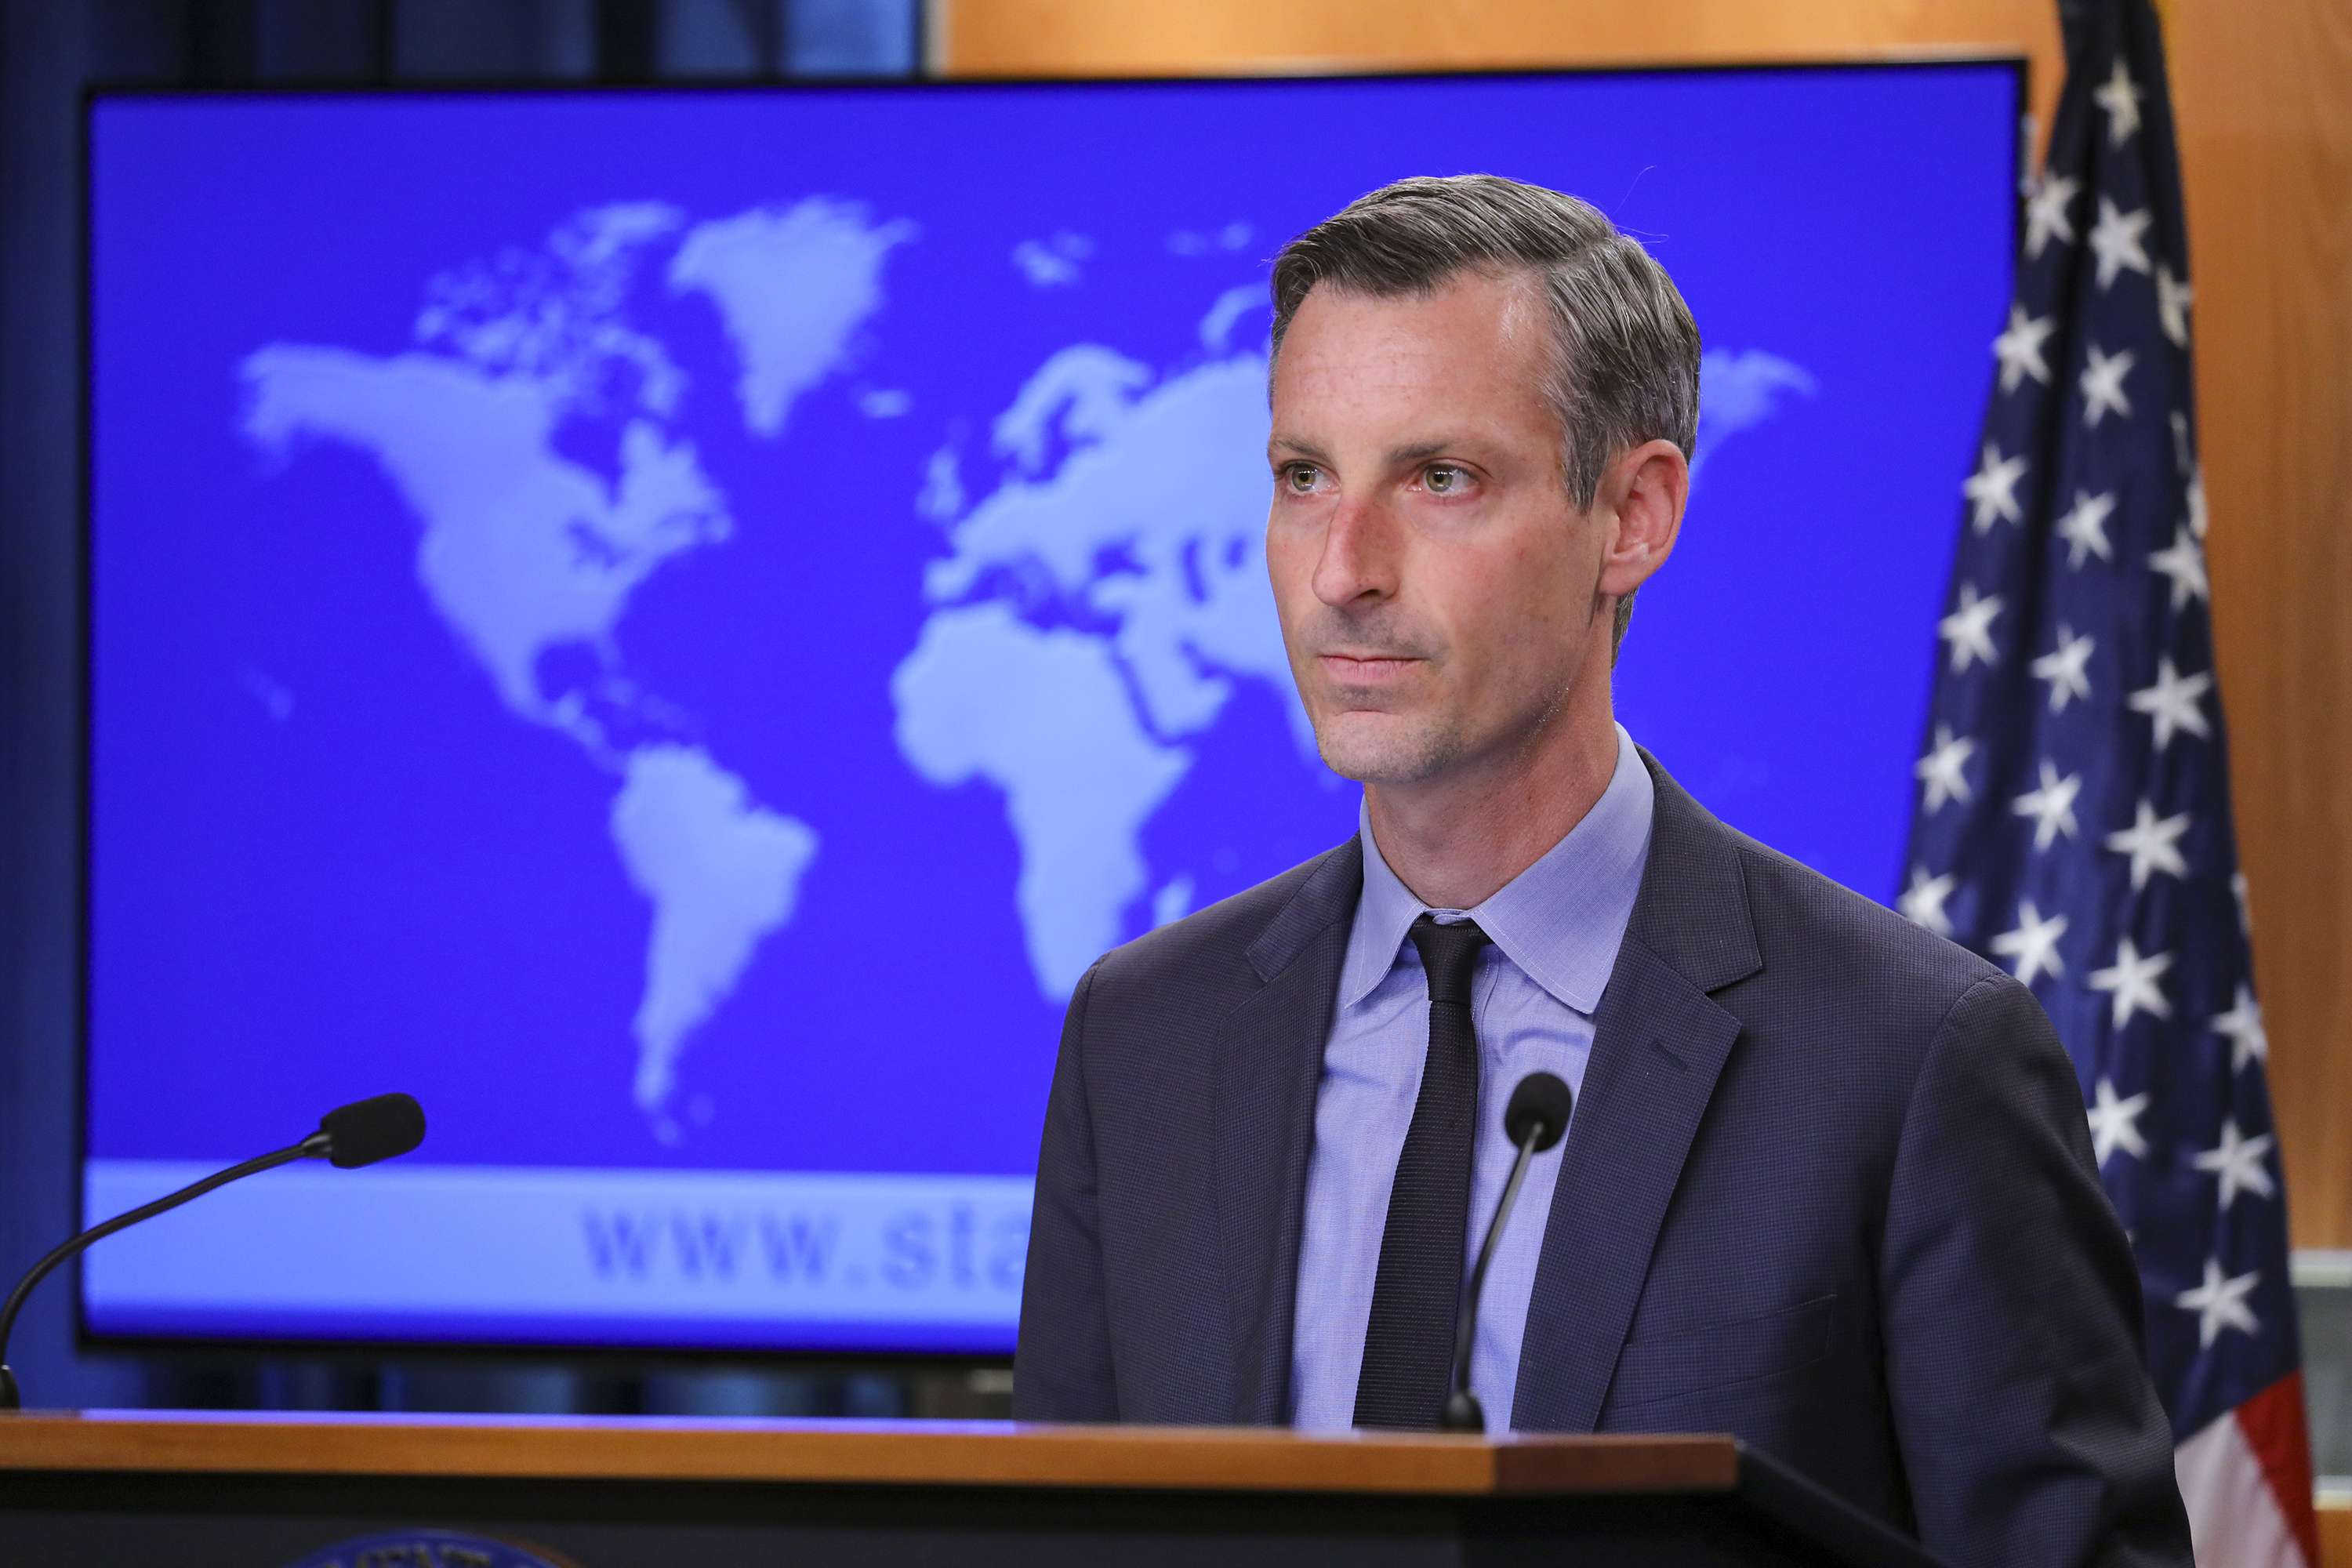 US State Department Spokesperson Ned Price answers the questions of the press during the daily press briefing at the State Department in Washington D.C., on January 9.